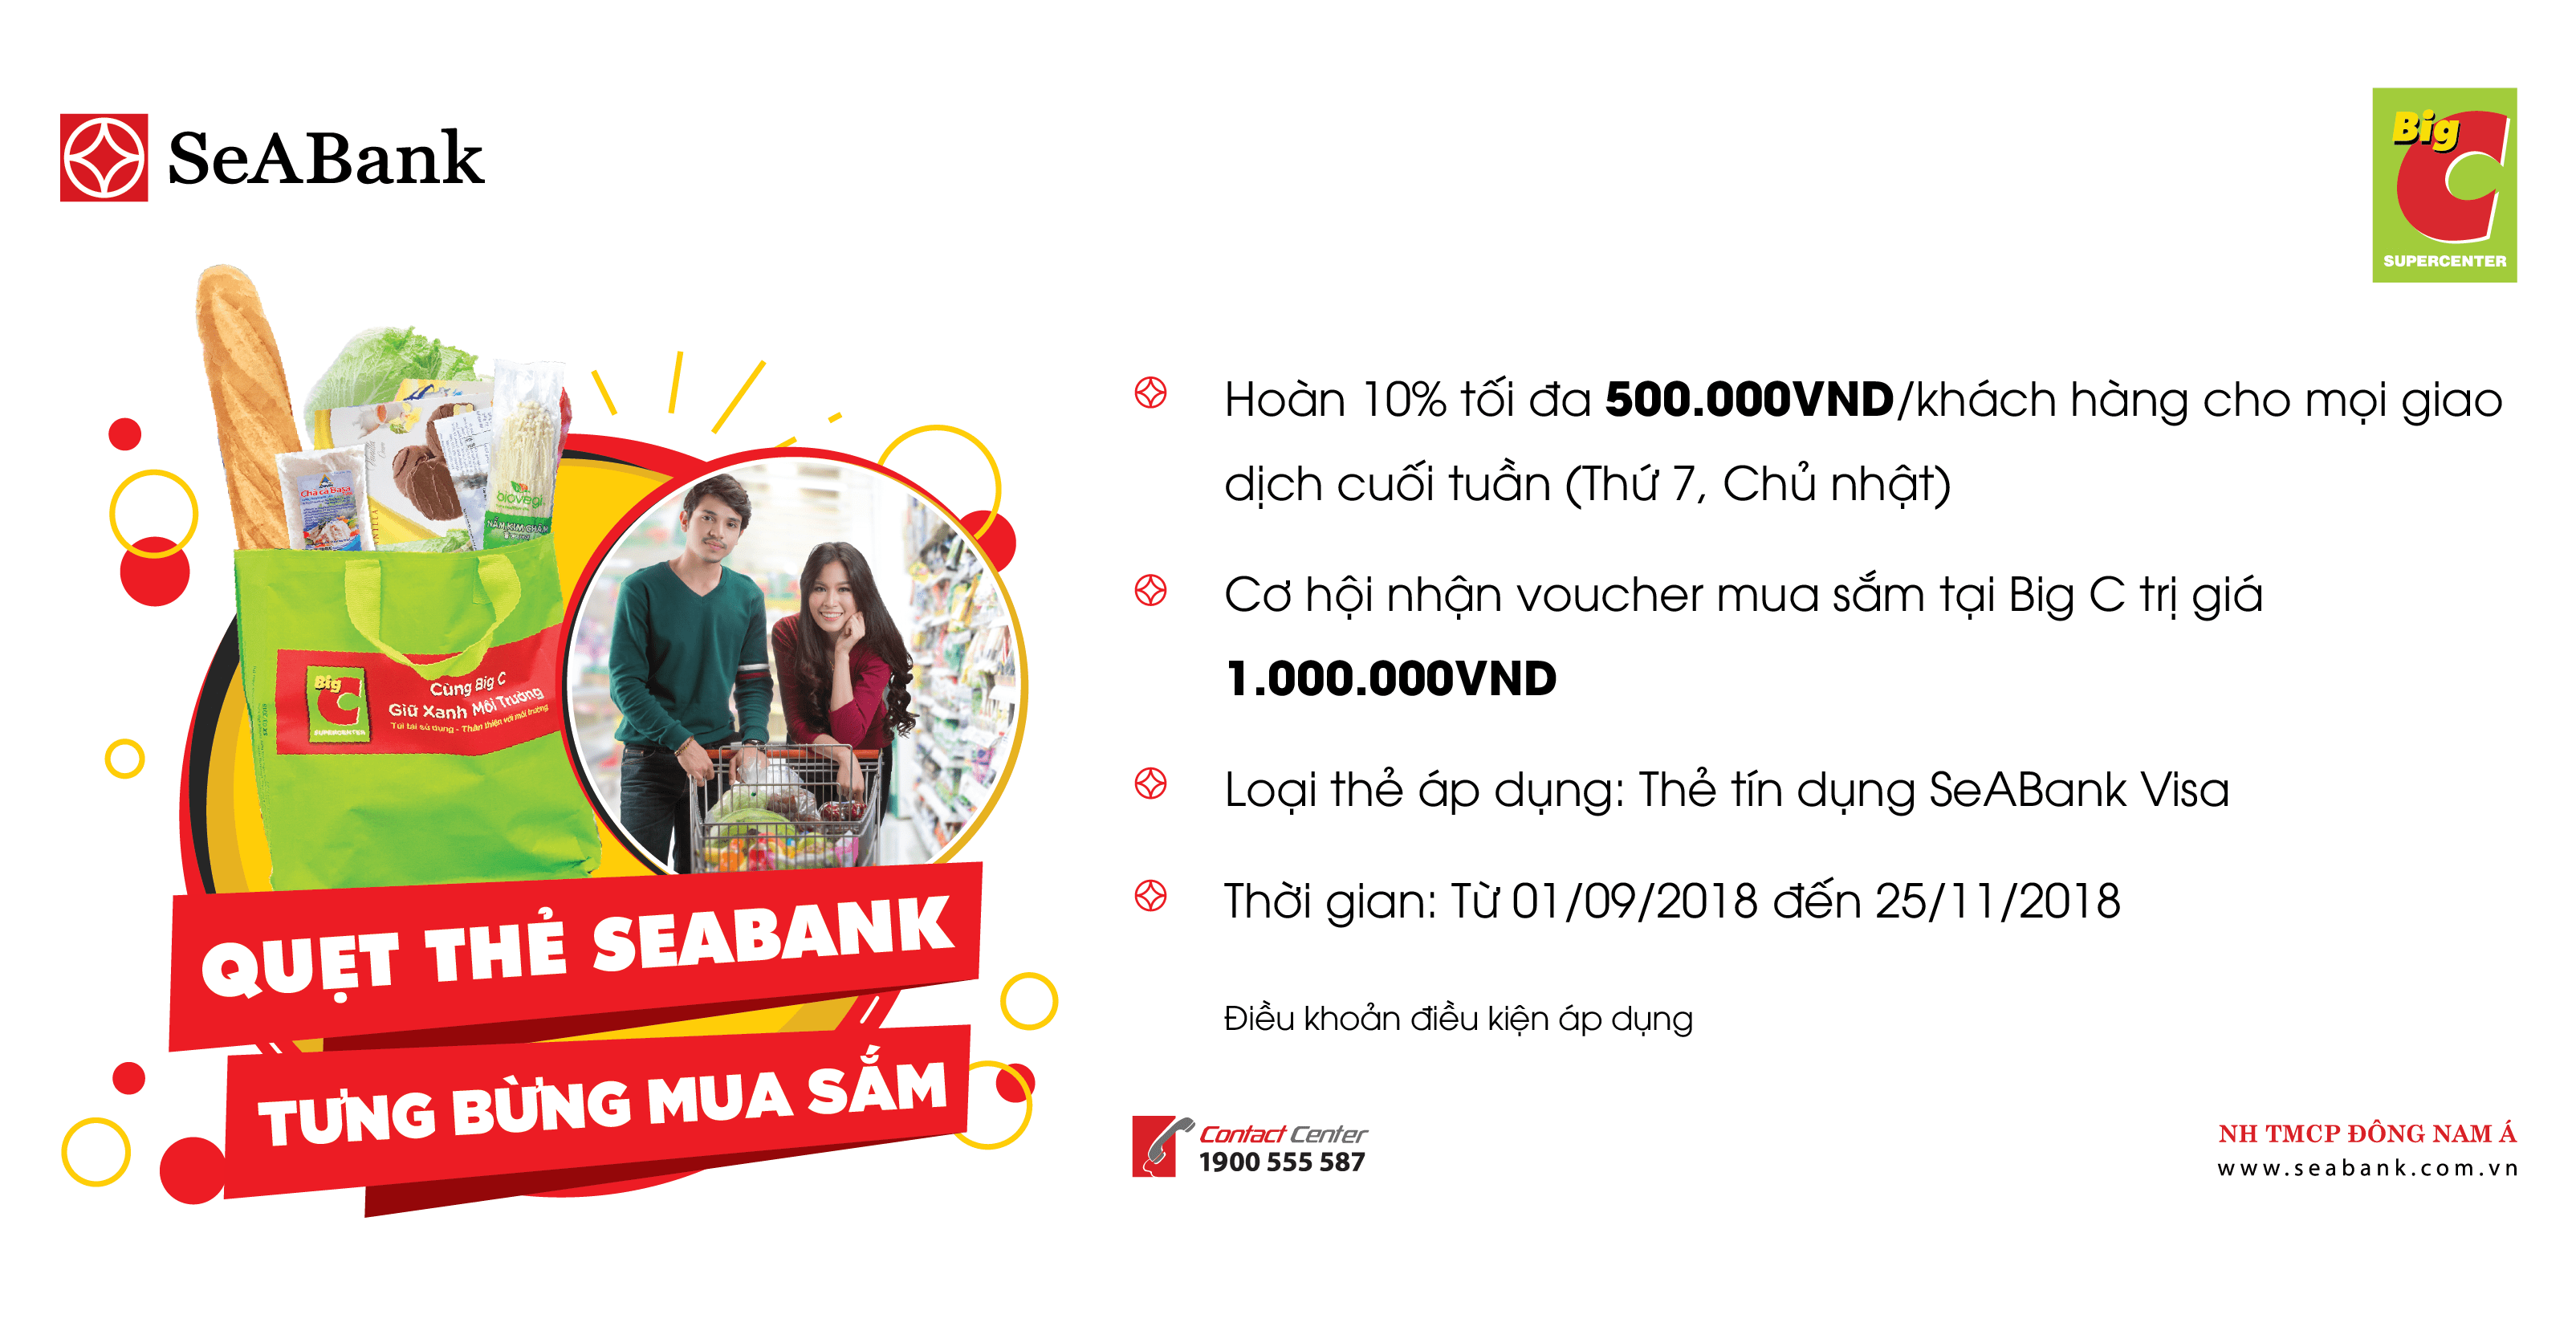 With SeABank,  get cash back 10% and lucky draw